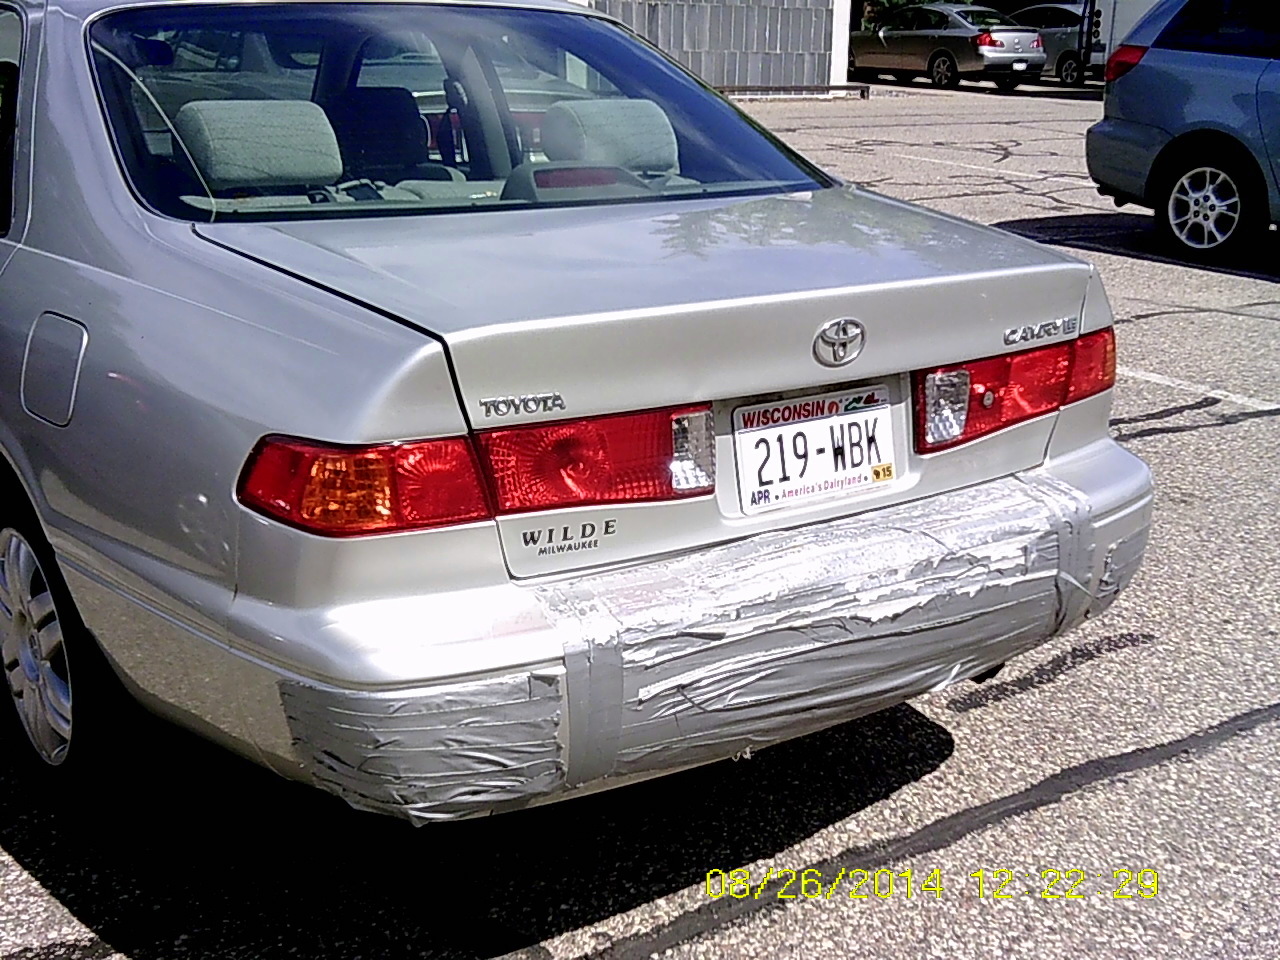 Got Enough Duct Tape?